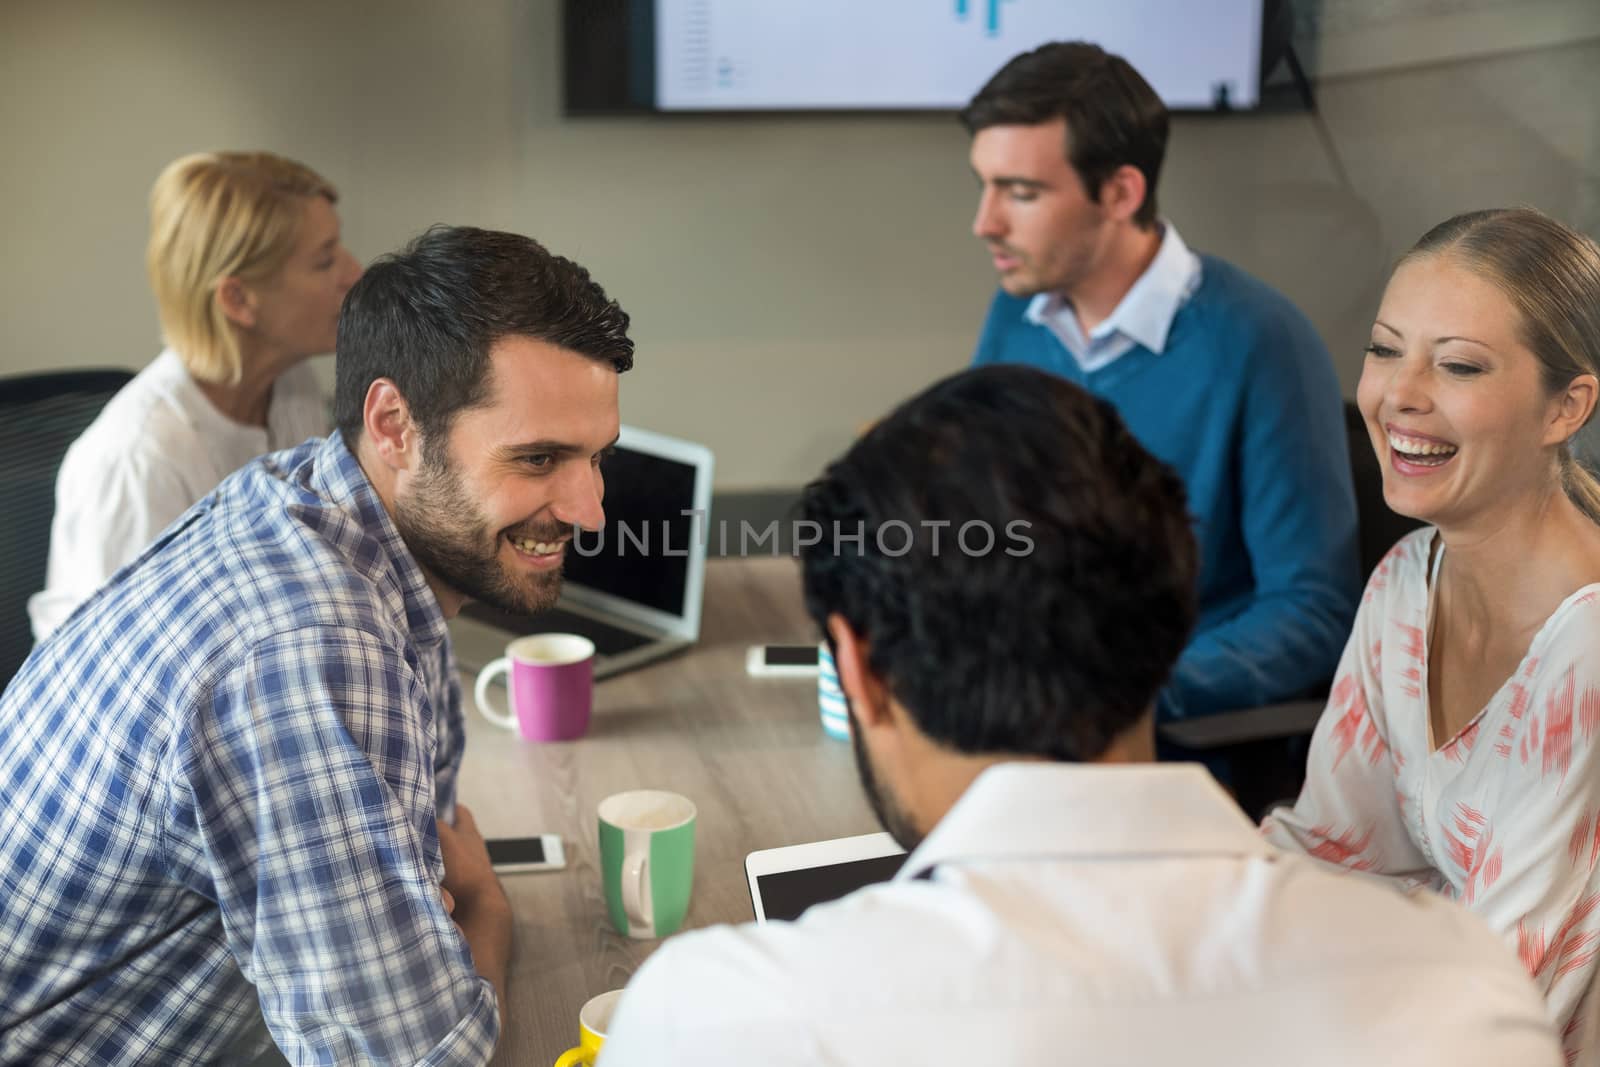 Business people interacting during a meeting by Wavebreakmedia